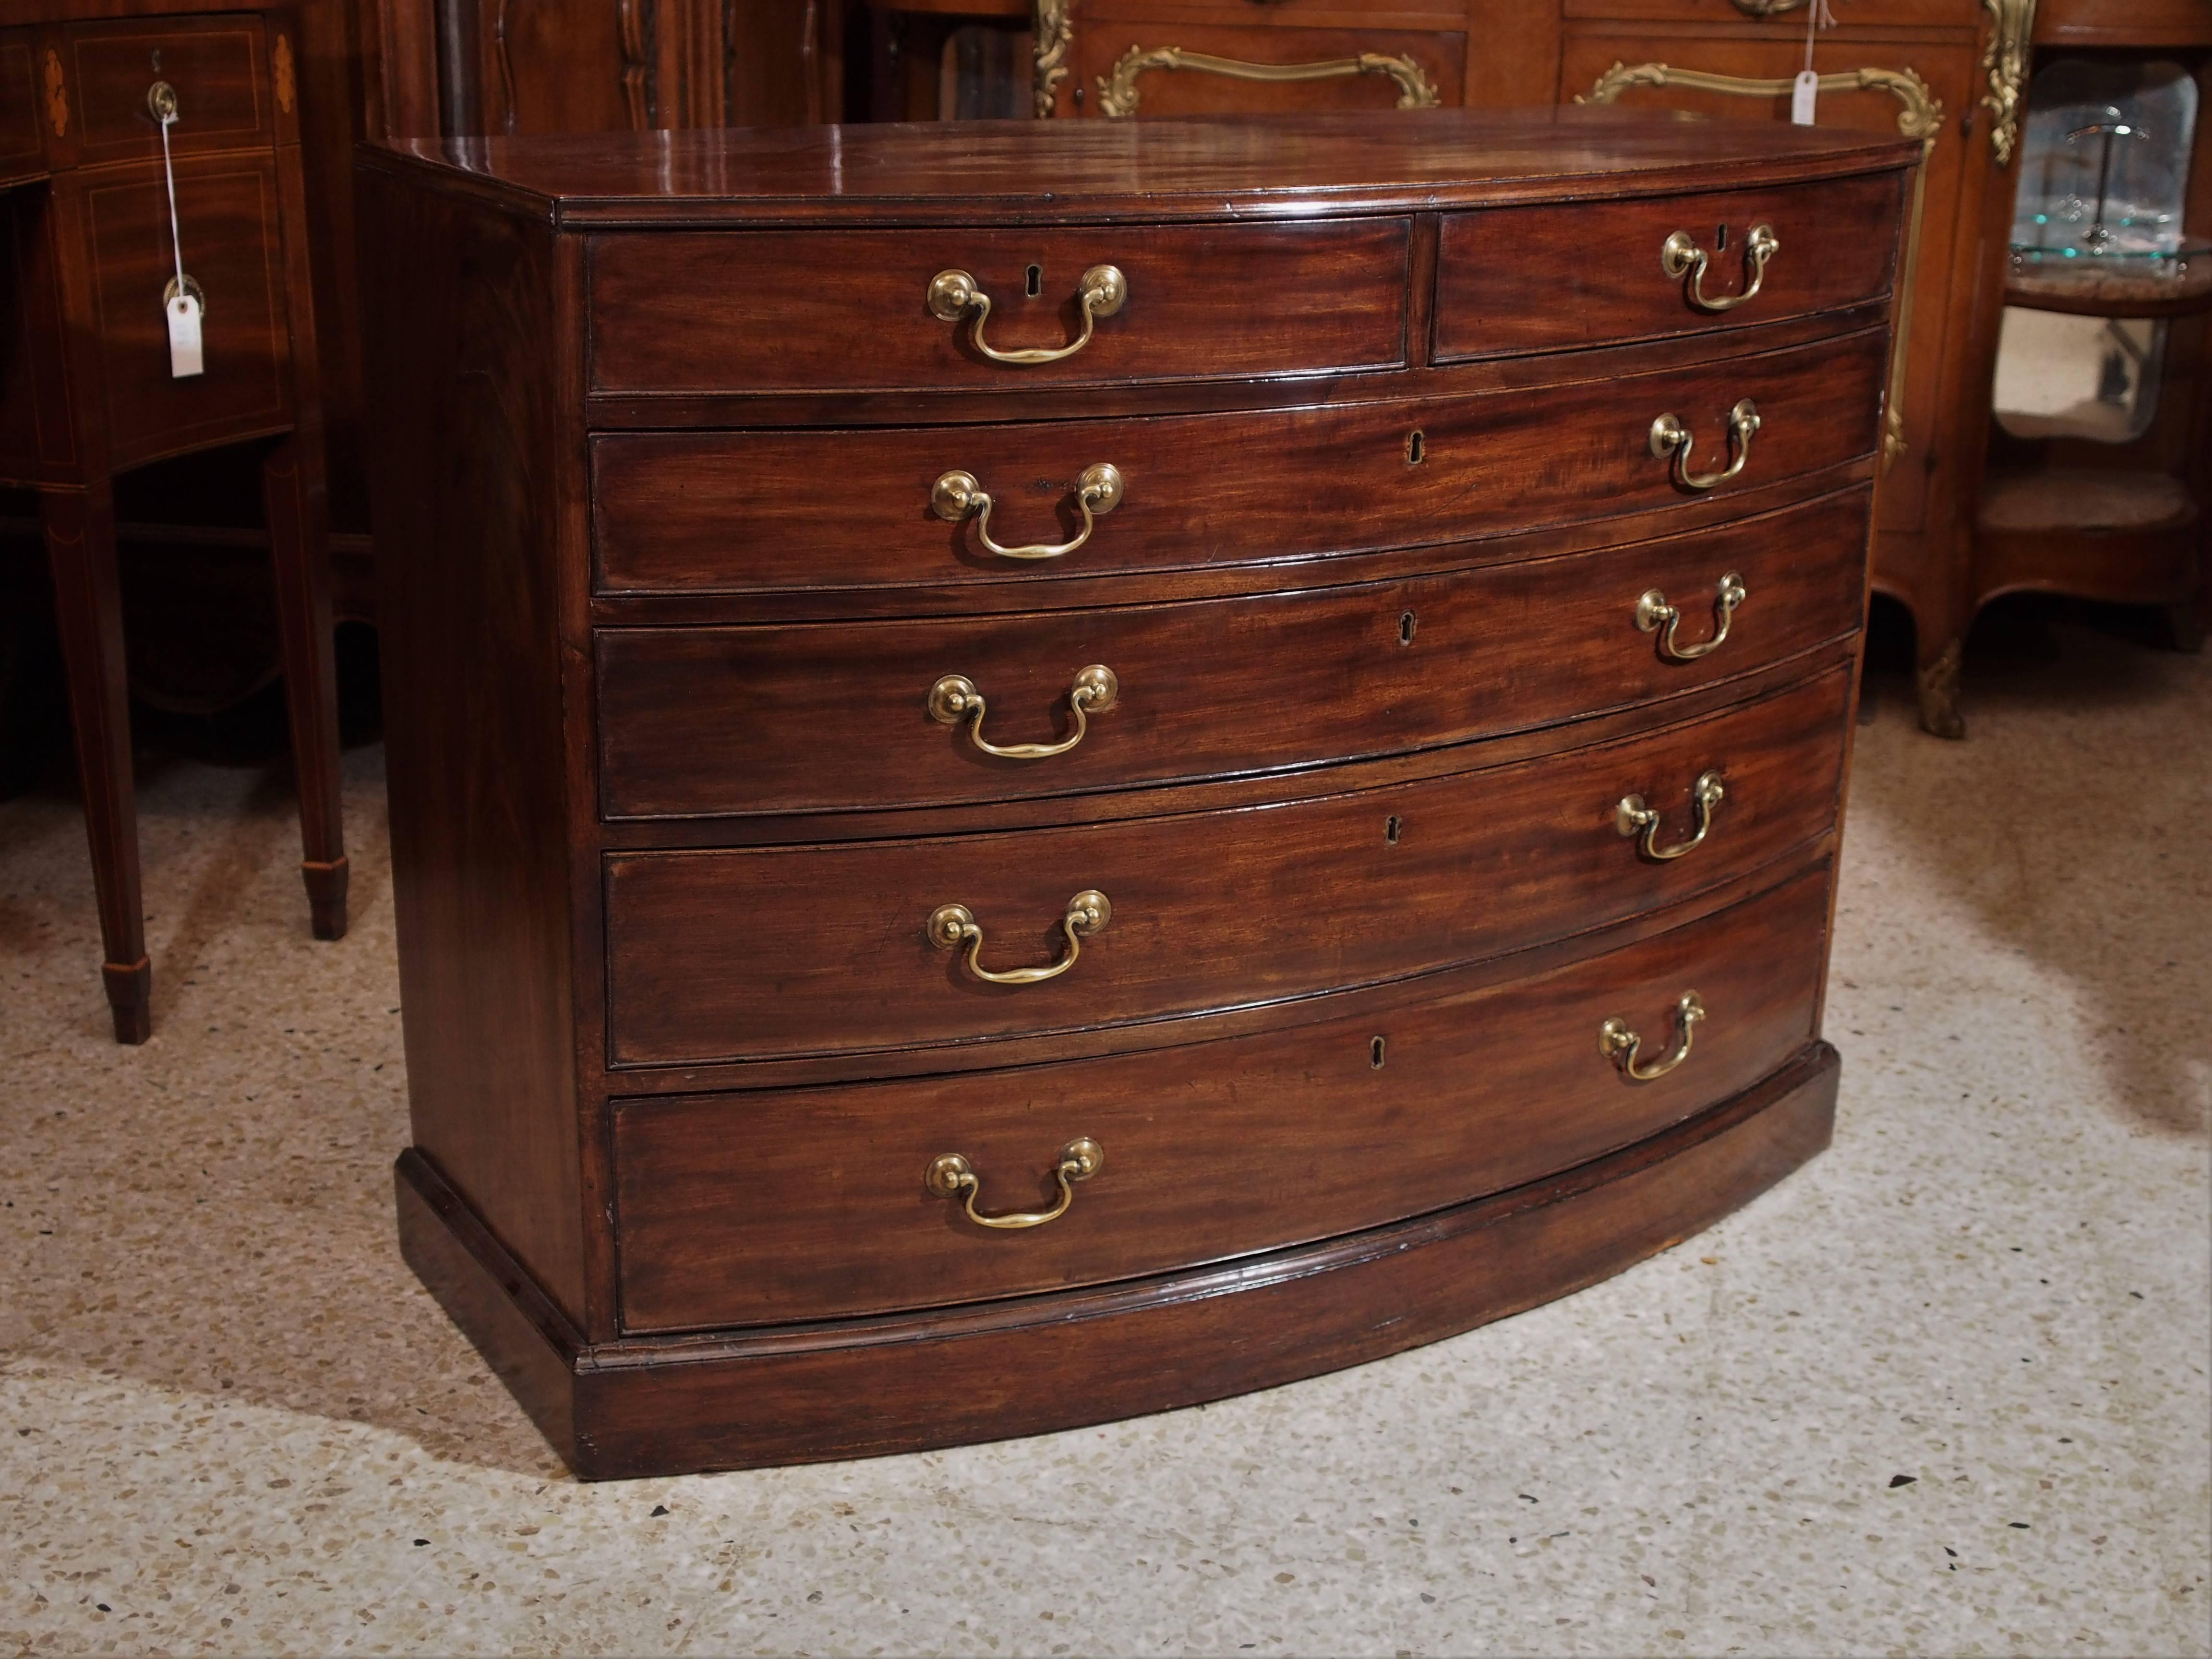 This handsome bow front chest is sold and very appealing. The shape of the drawers follow the lines of the front. This practical piece of antique furniture has four full bottom drawers, with the top drawer split in two.